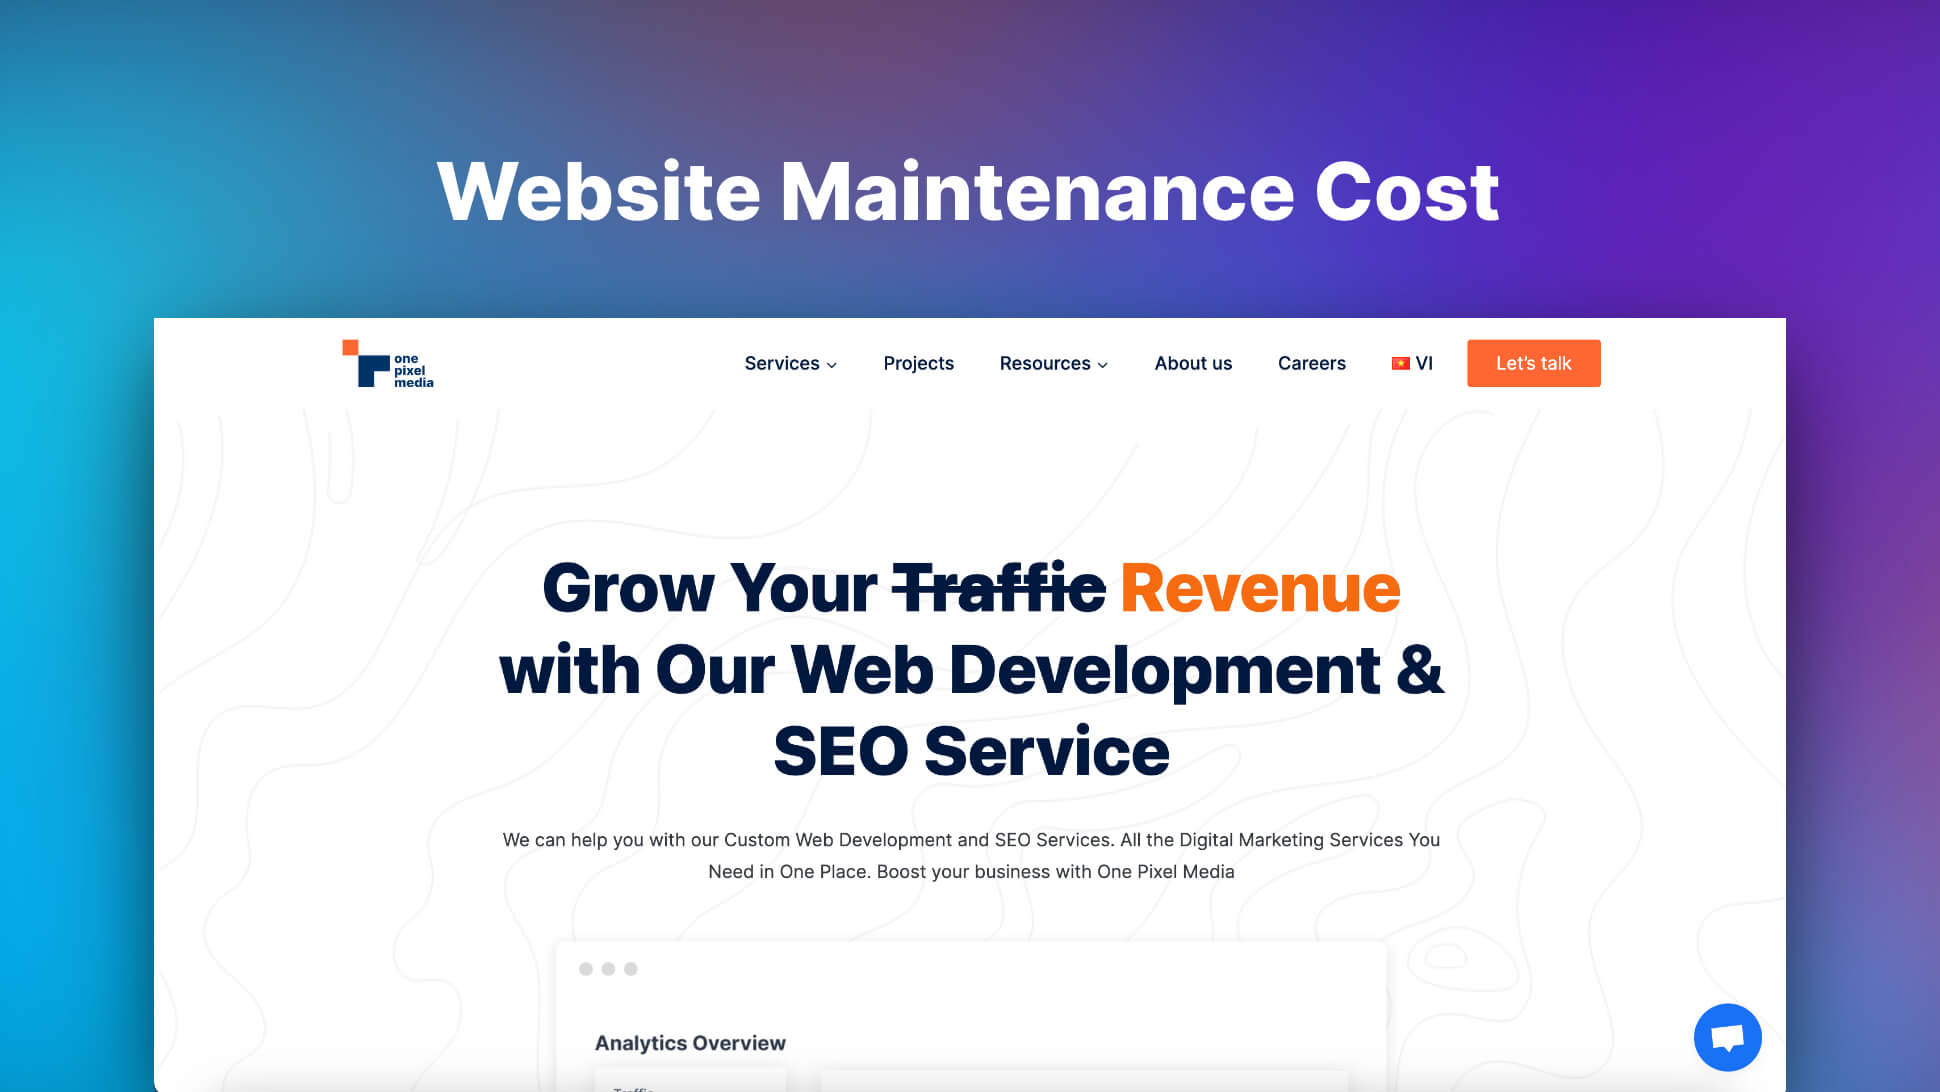 Website Maintenance Cost: What does website maintenance include?